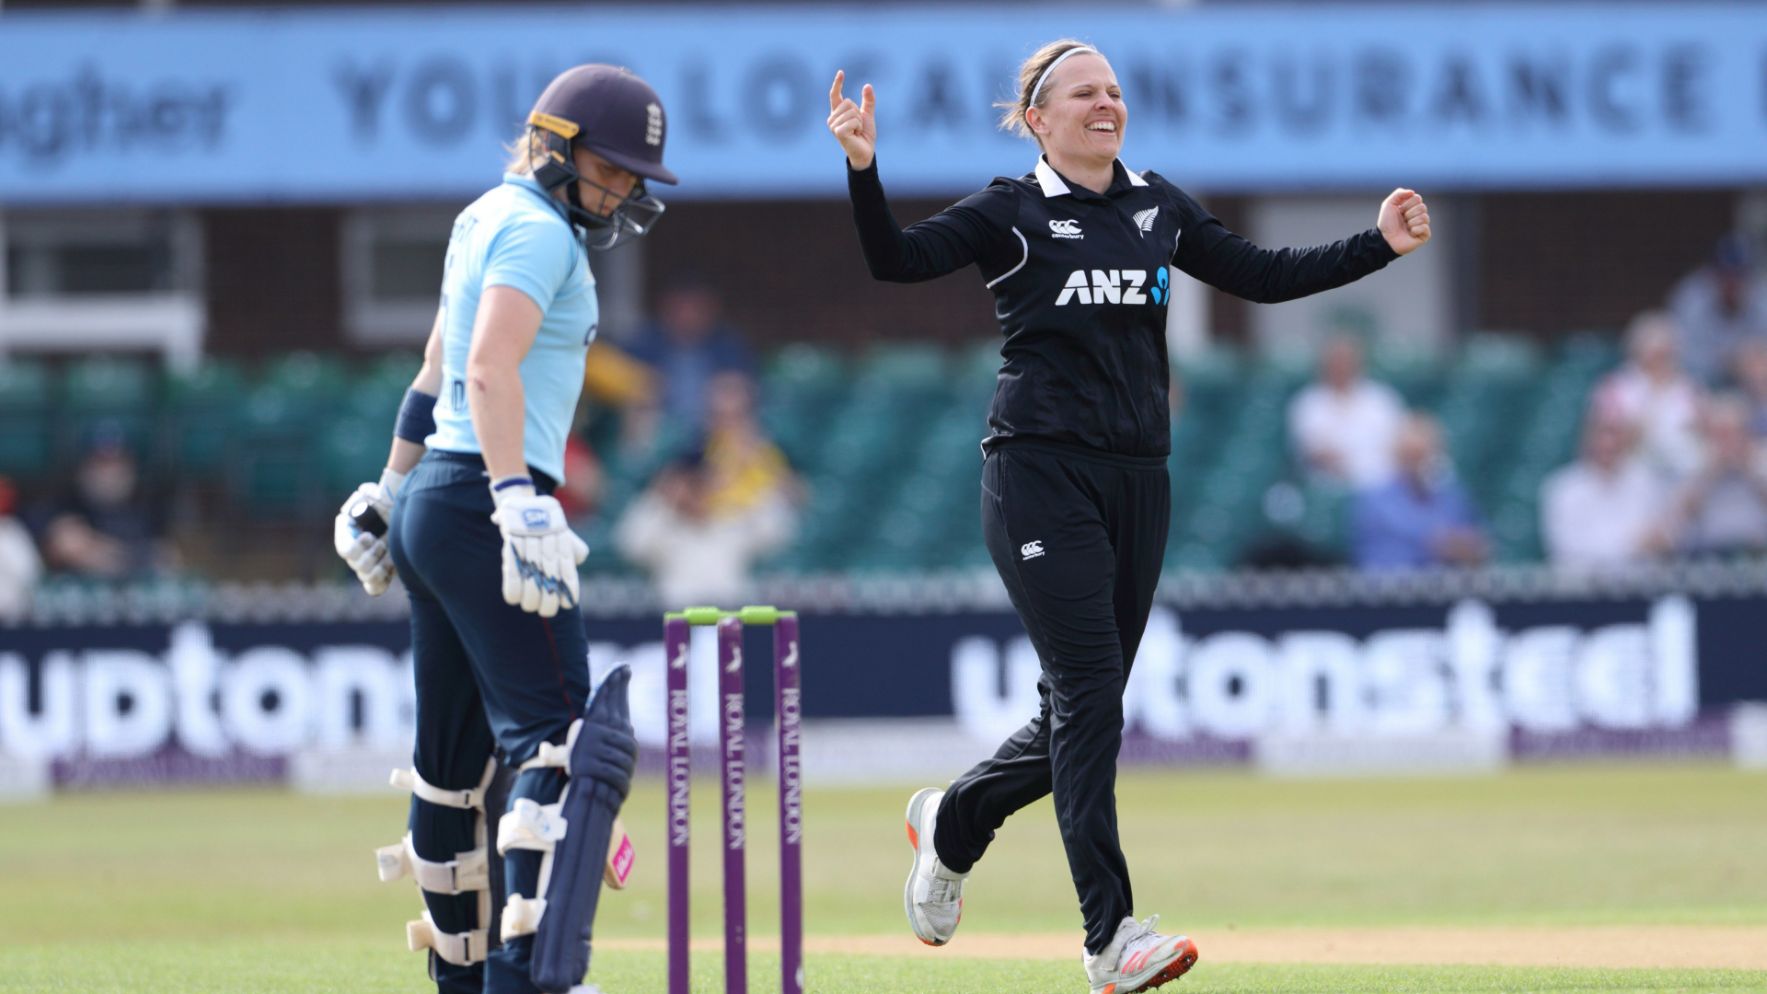 Three surgeries and eight weeks of rehab: How White Ferns' Lea Tahuhu got through cancer scare